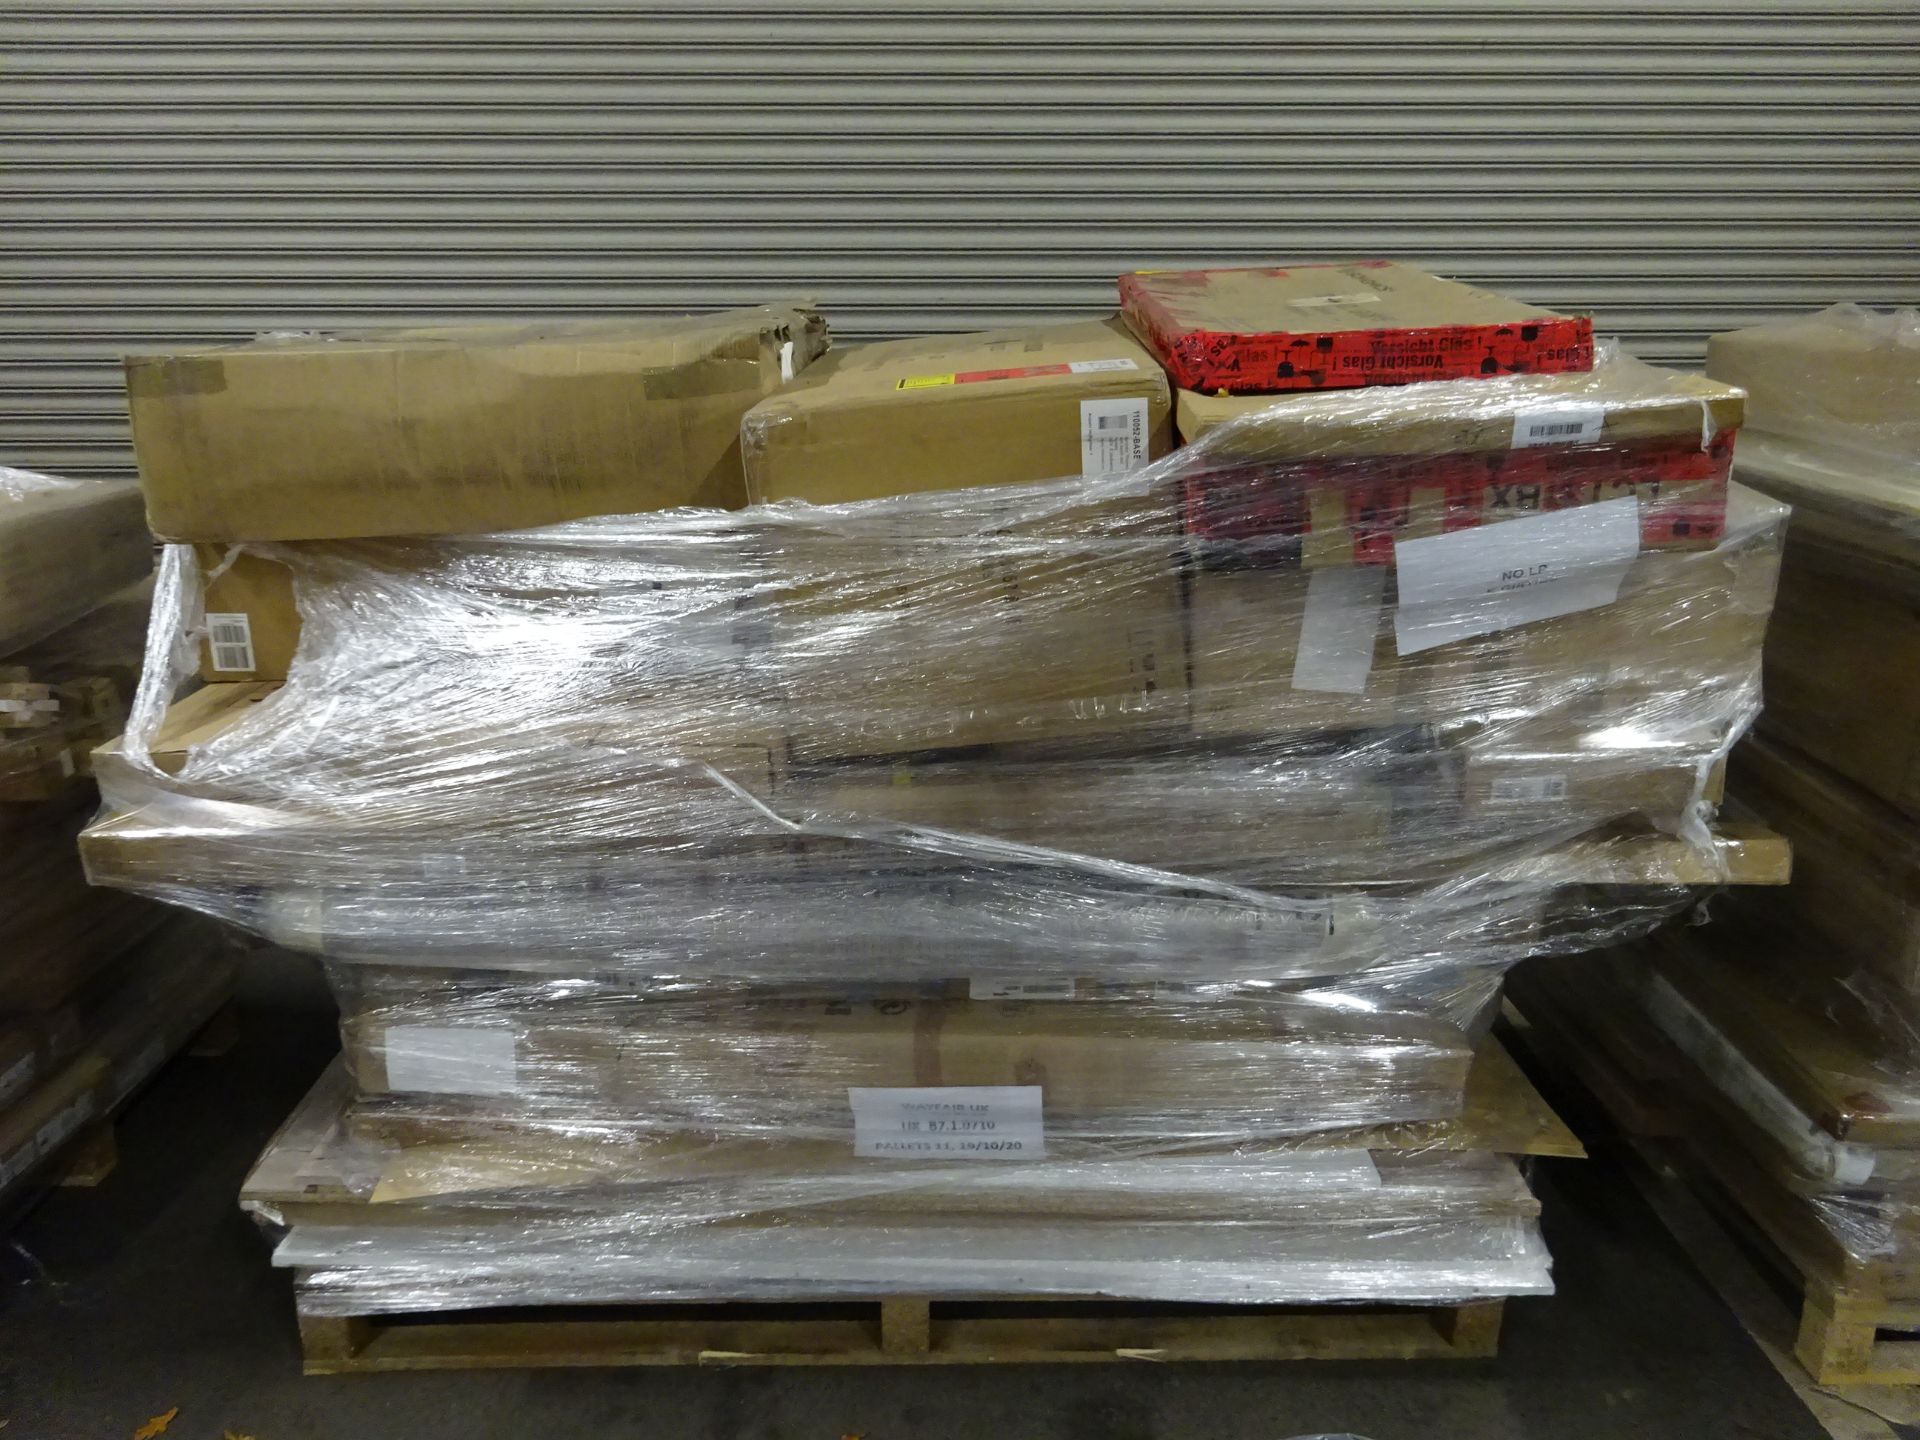 LG DOUBLE PALLET OF UNTESTED WAYFAIR CUSTOMER RETURNS (NO MANIFEST). WE HAVE NOT TOUCHED OR PICKED - Image 4 of 4